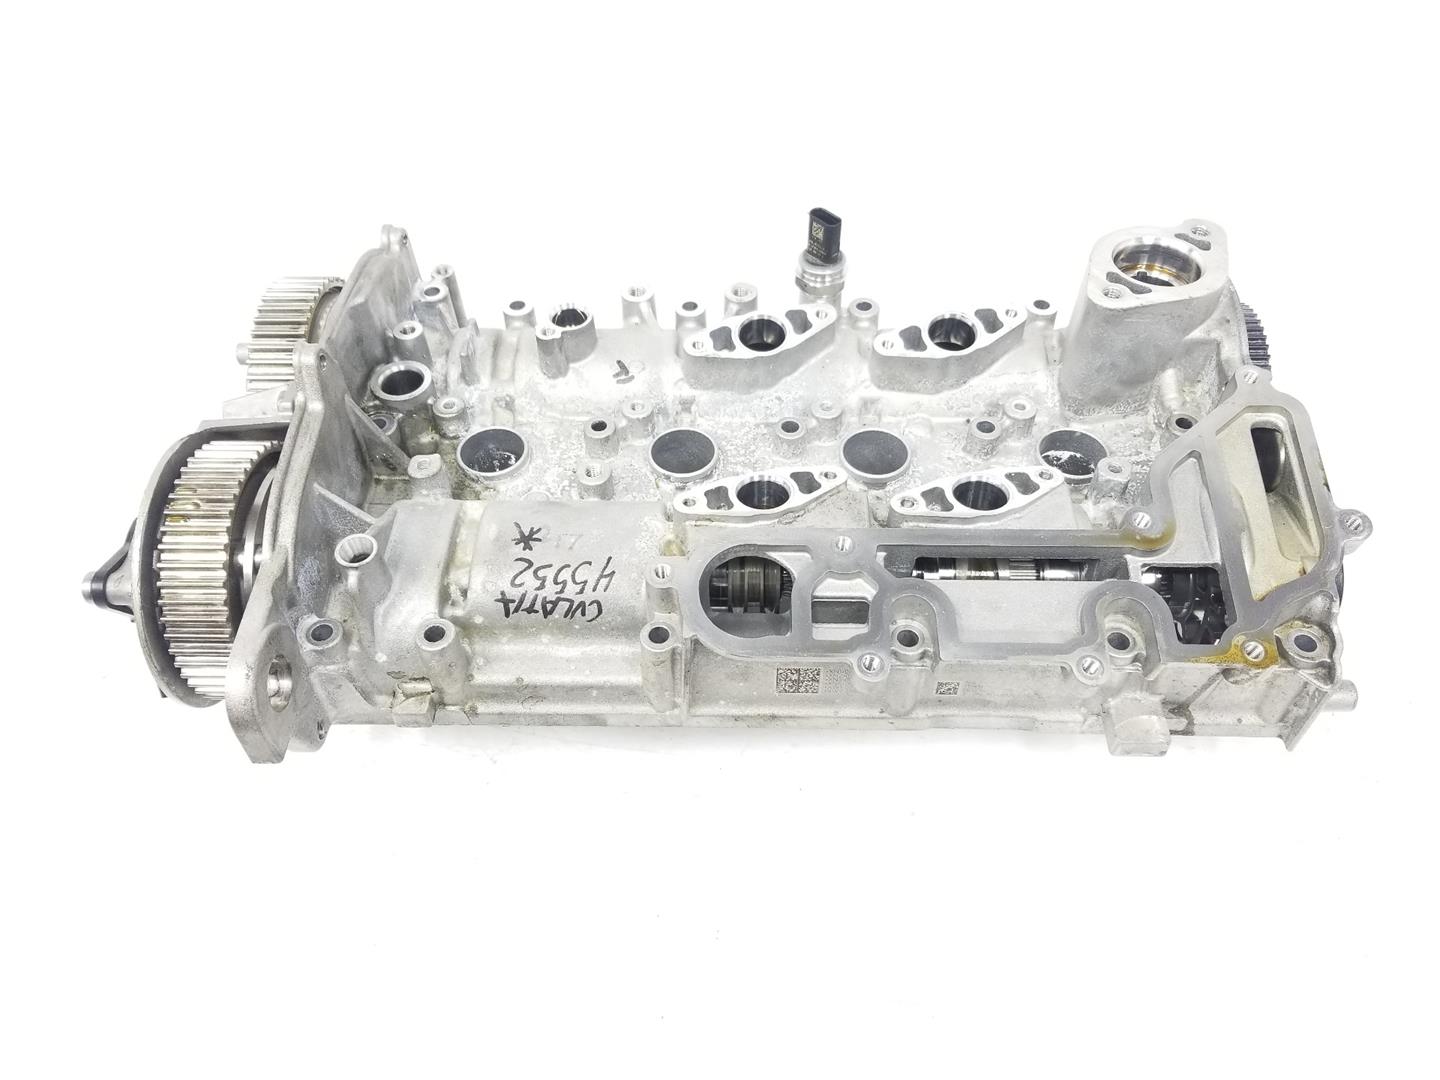 SEAT Toledo 3 generation (2004-2010) Engine Cylinder Head 04E103469DH, 04E103469DH, 2222DL 19778374